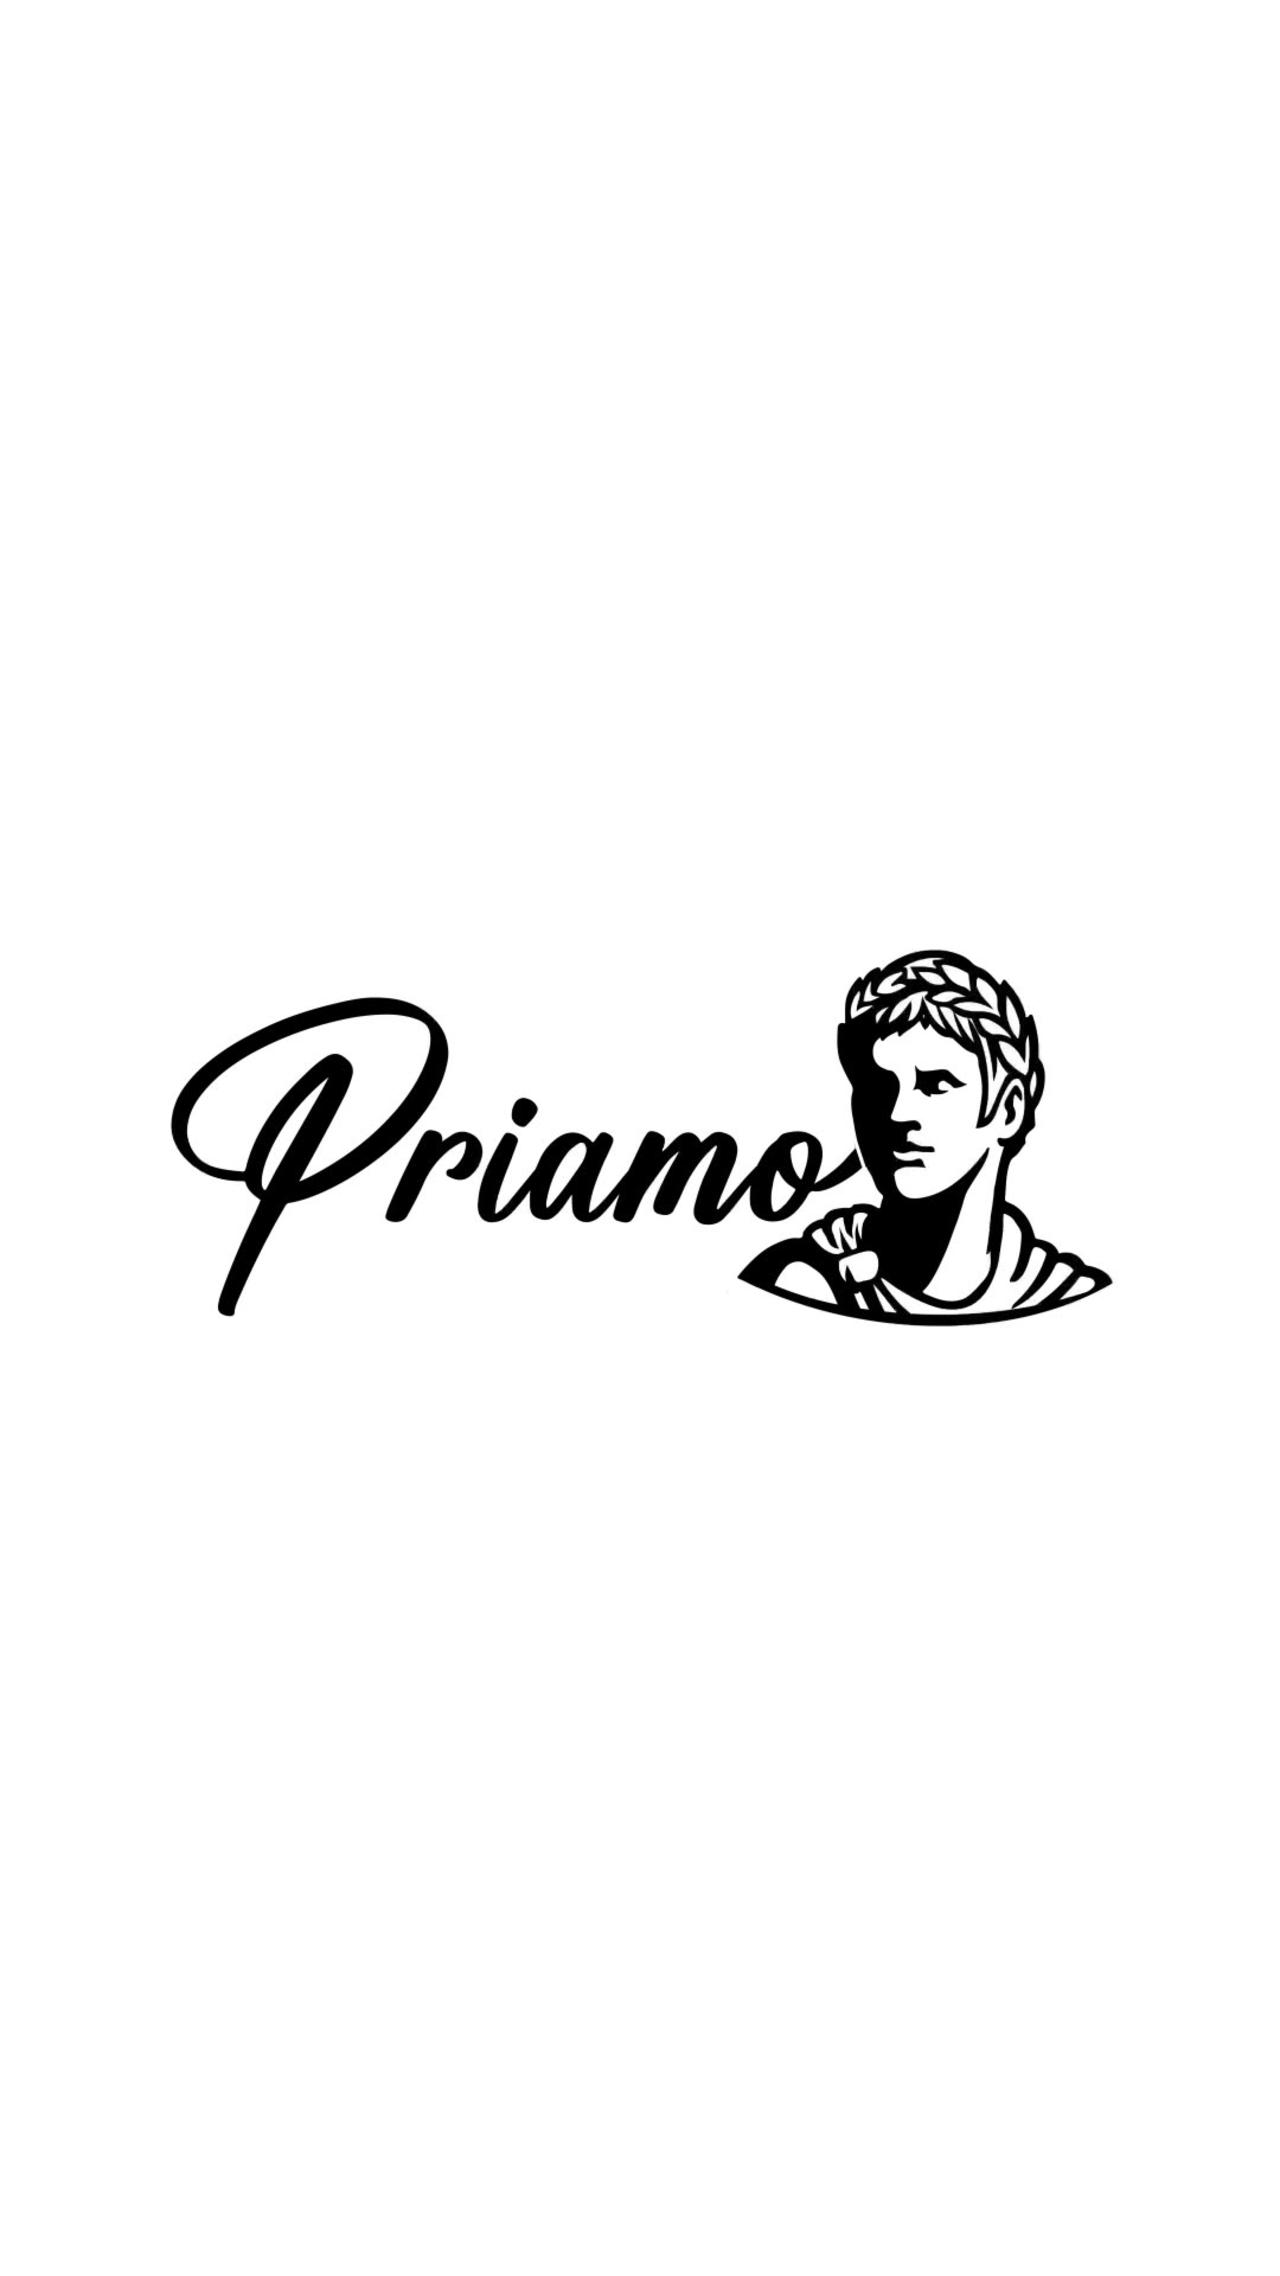 Why You Need A Presence In Business - Priamo